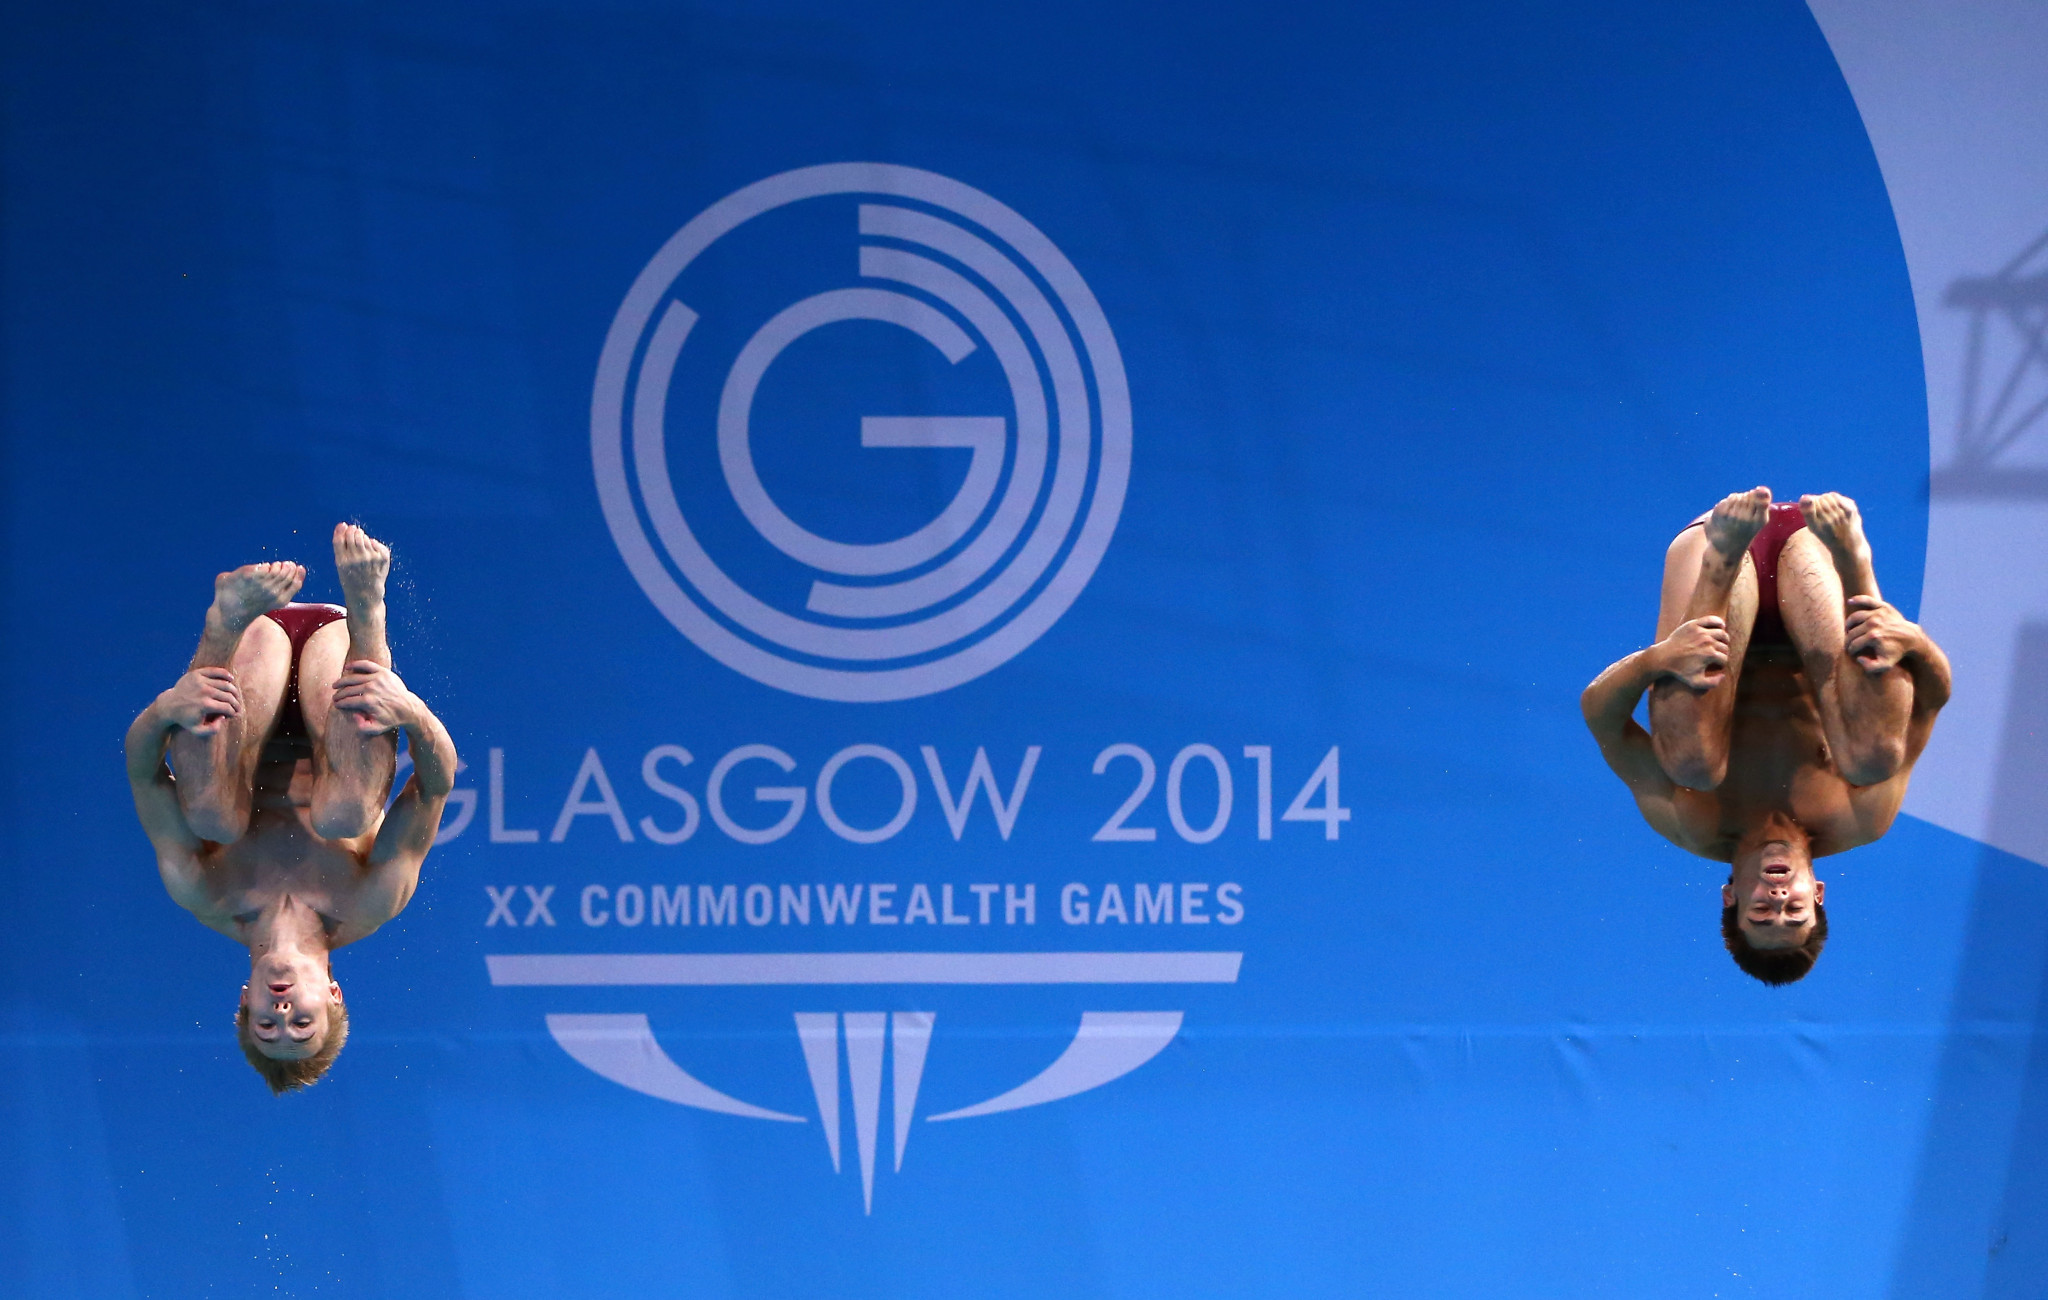 An acclaimed partnership with UNICEF was part of the Glasgow 2014 Commonwealth Games ©Getty Images